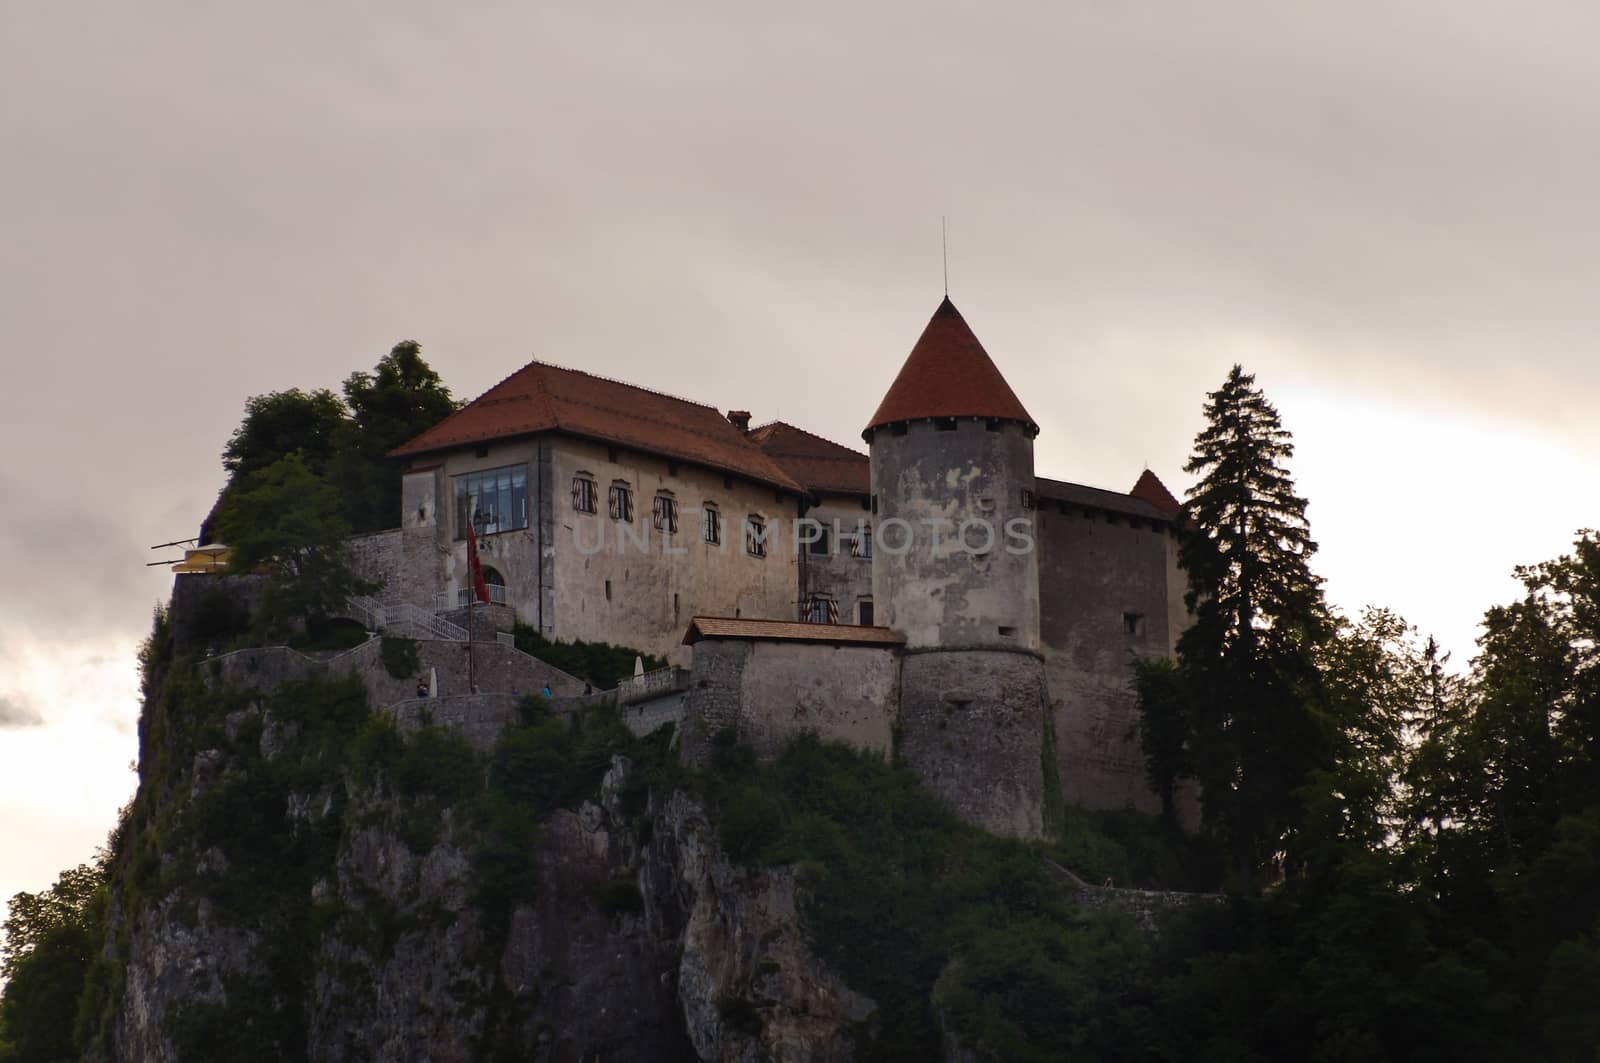 Bled castle, Slovenia in sunset, medieval castle on a rock